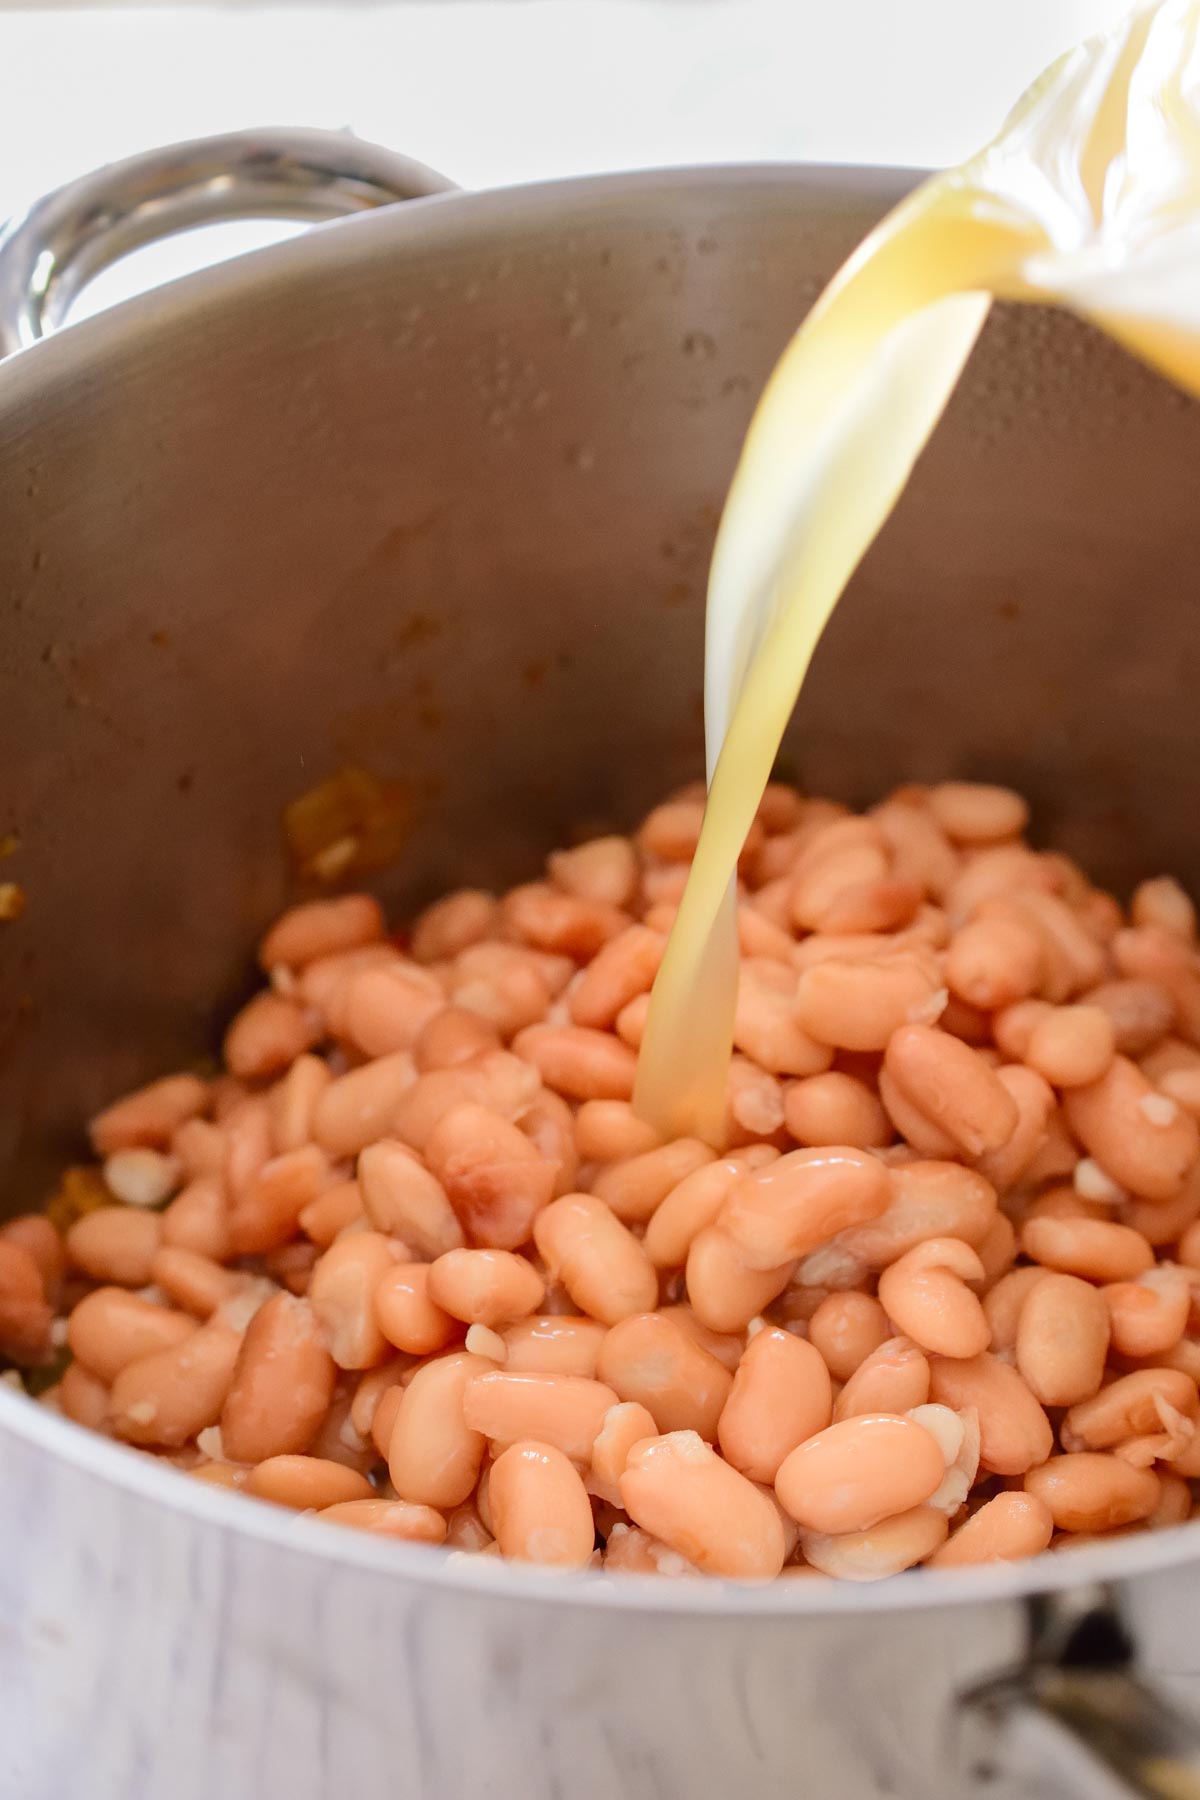 Pouring vegetable stock into the pot full of pinto beans.